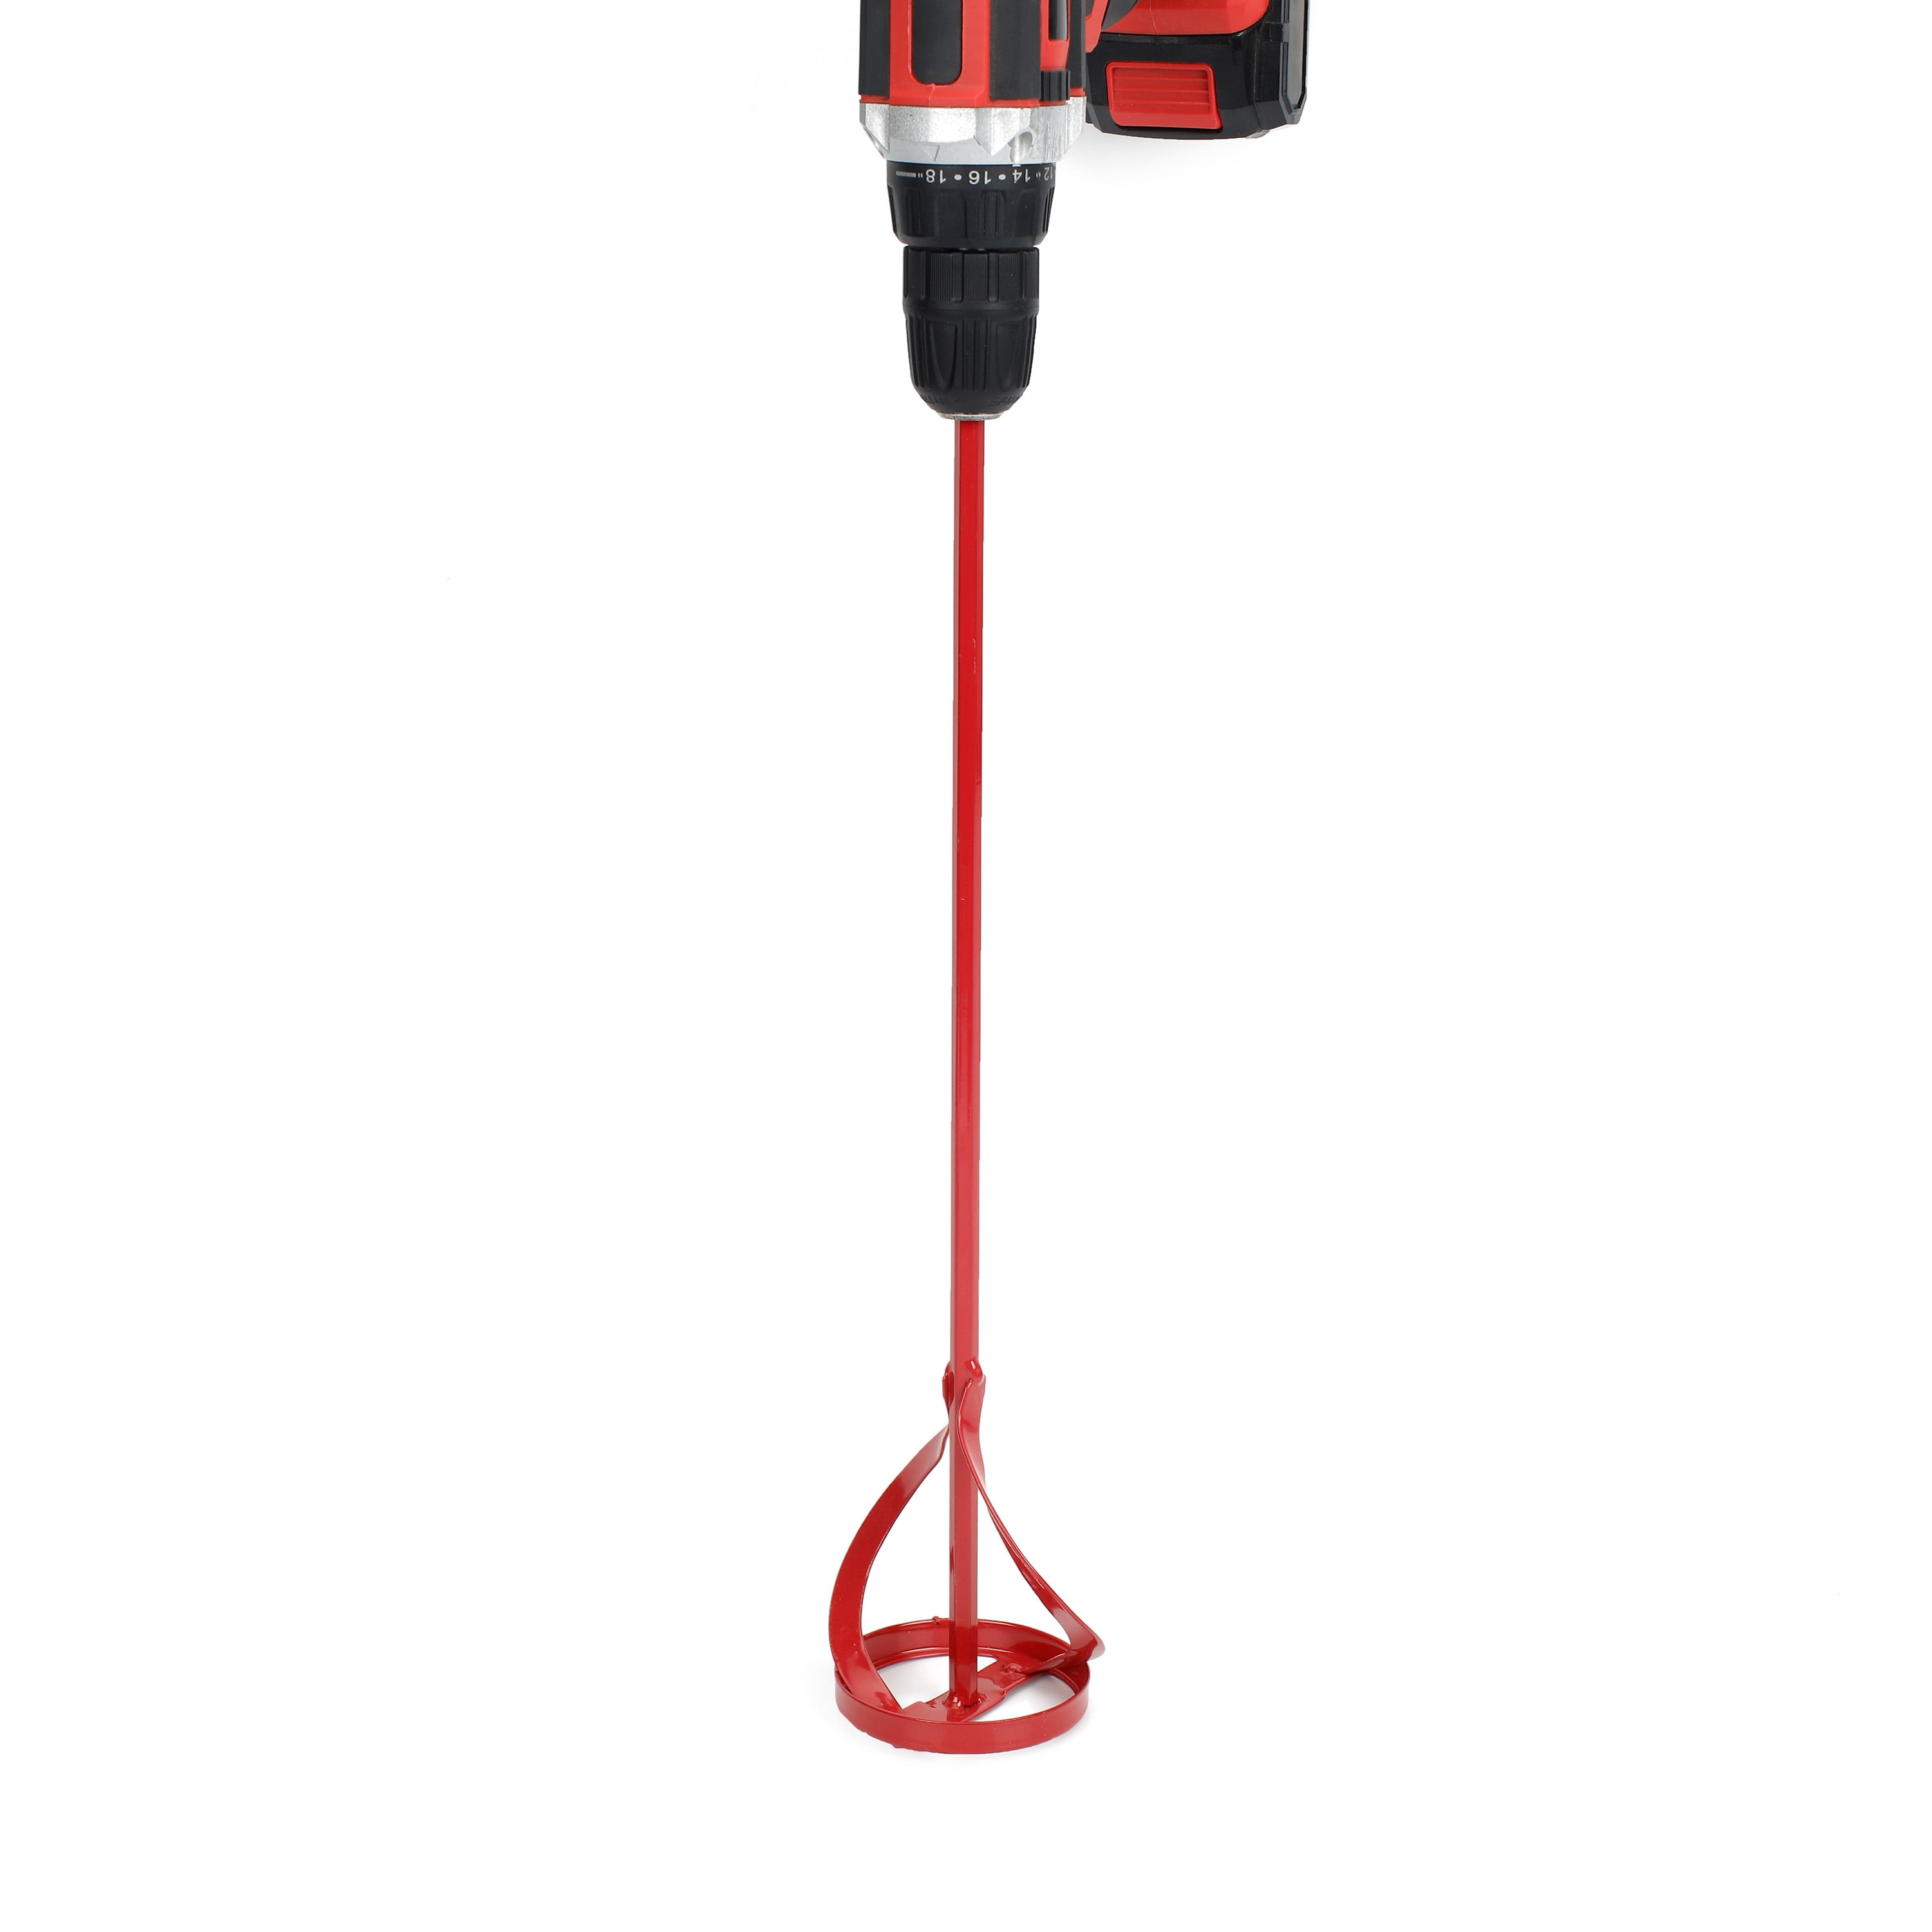 HM1) 1 Gallon Helix Mixer, Carded » ALLWAY® The Tools You Ask For